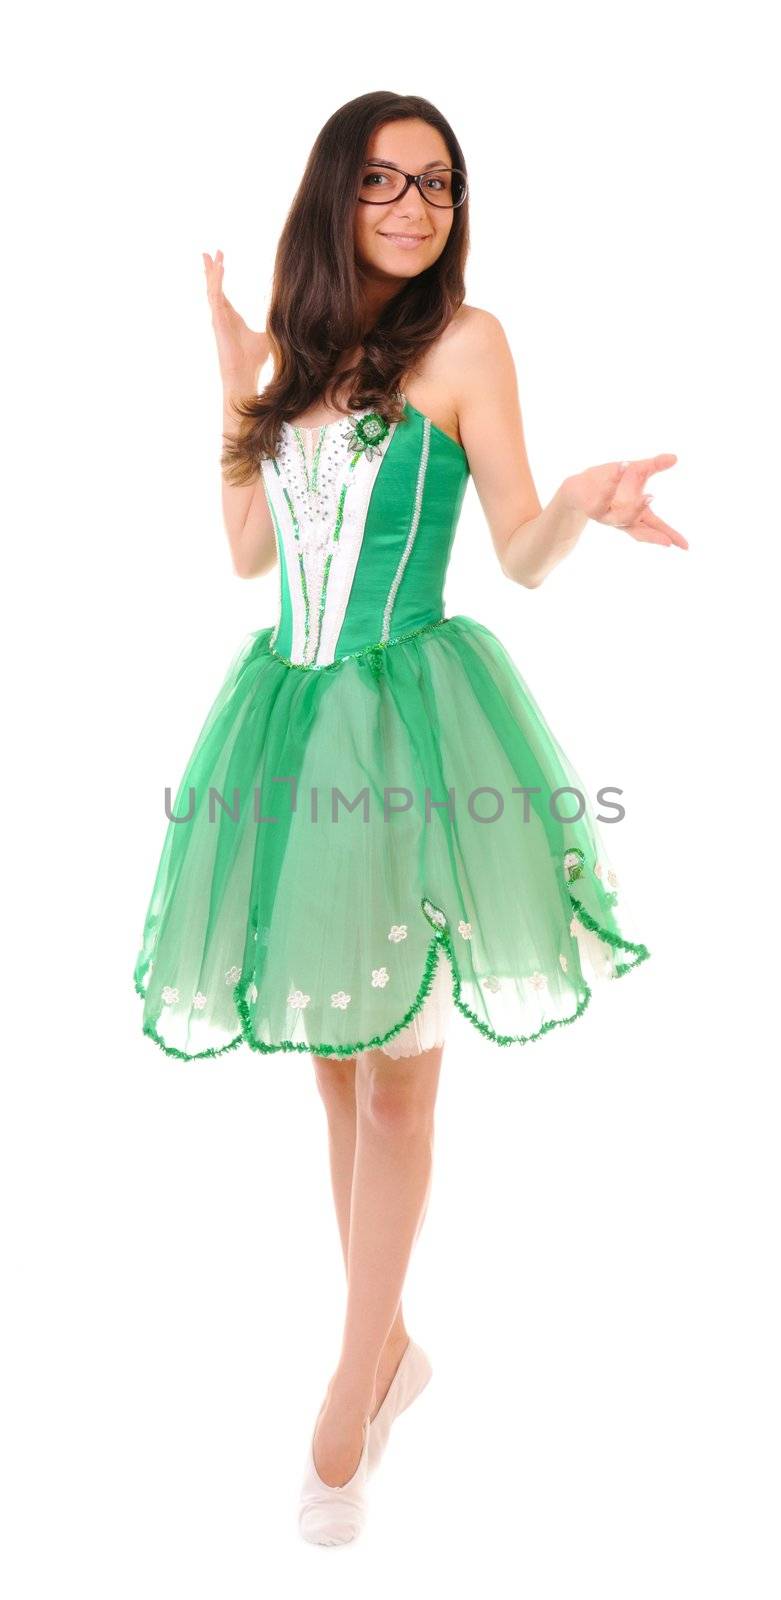 Dancing young woman in green ballet dress isolated on white background